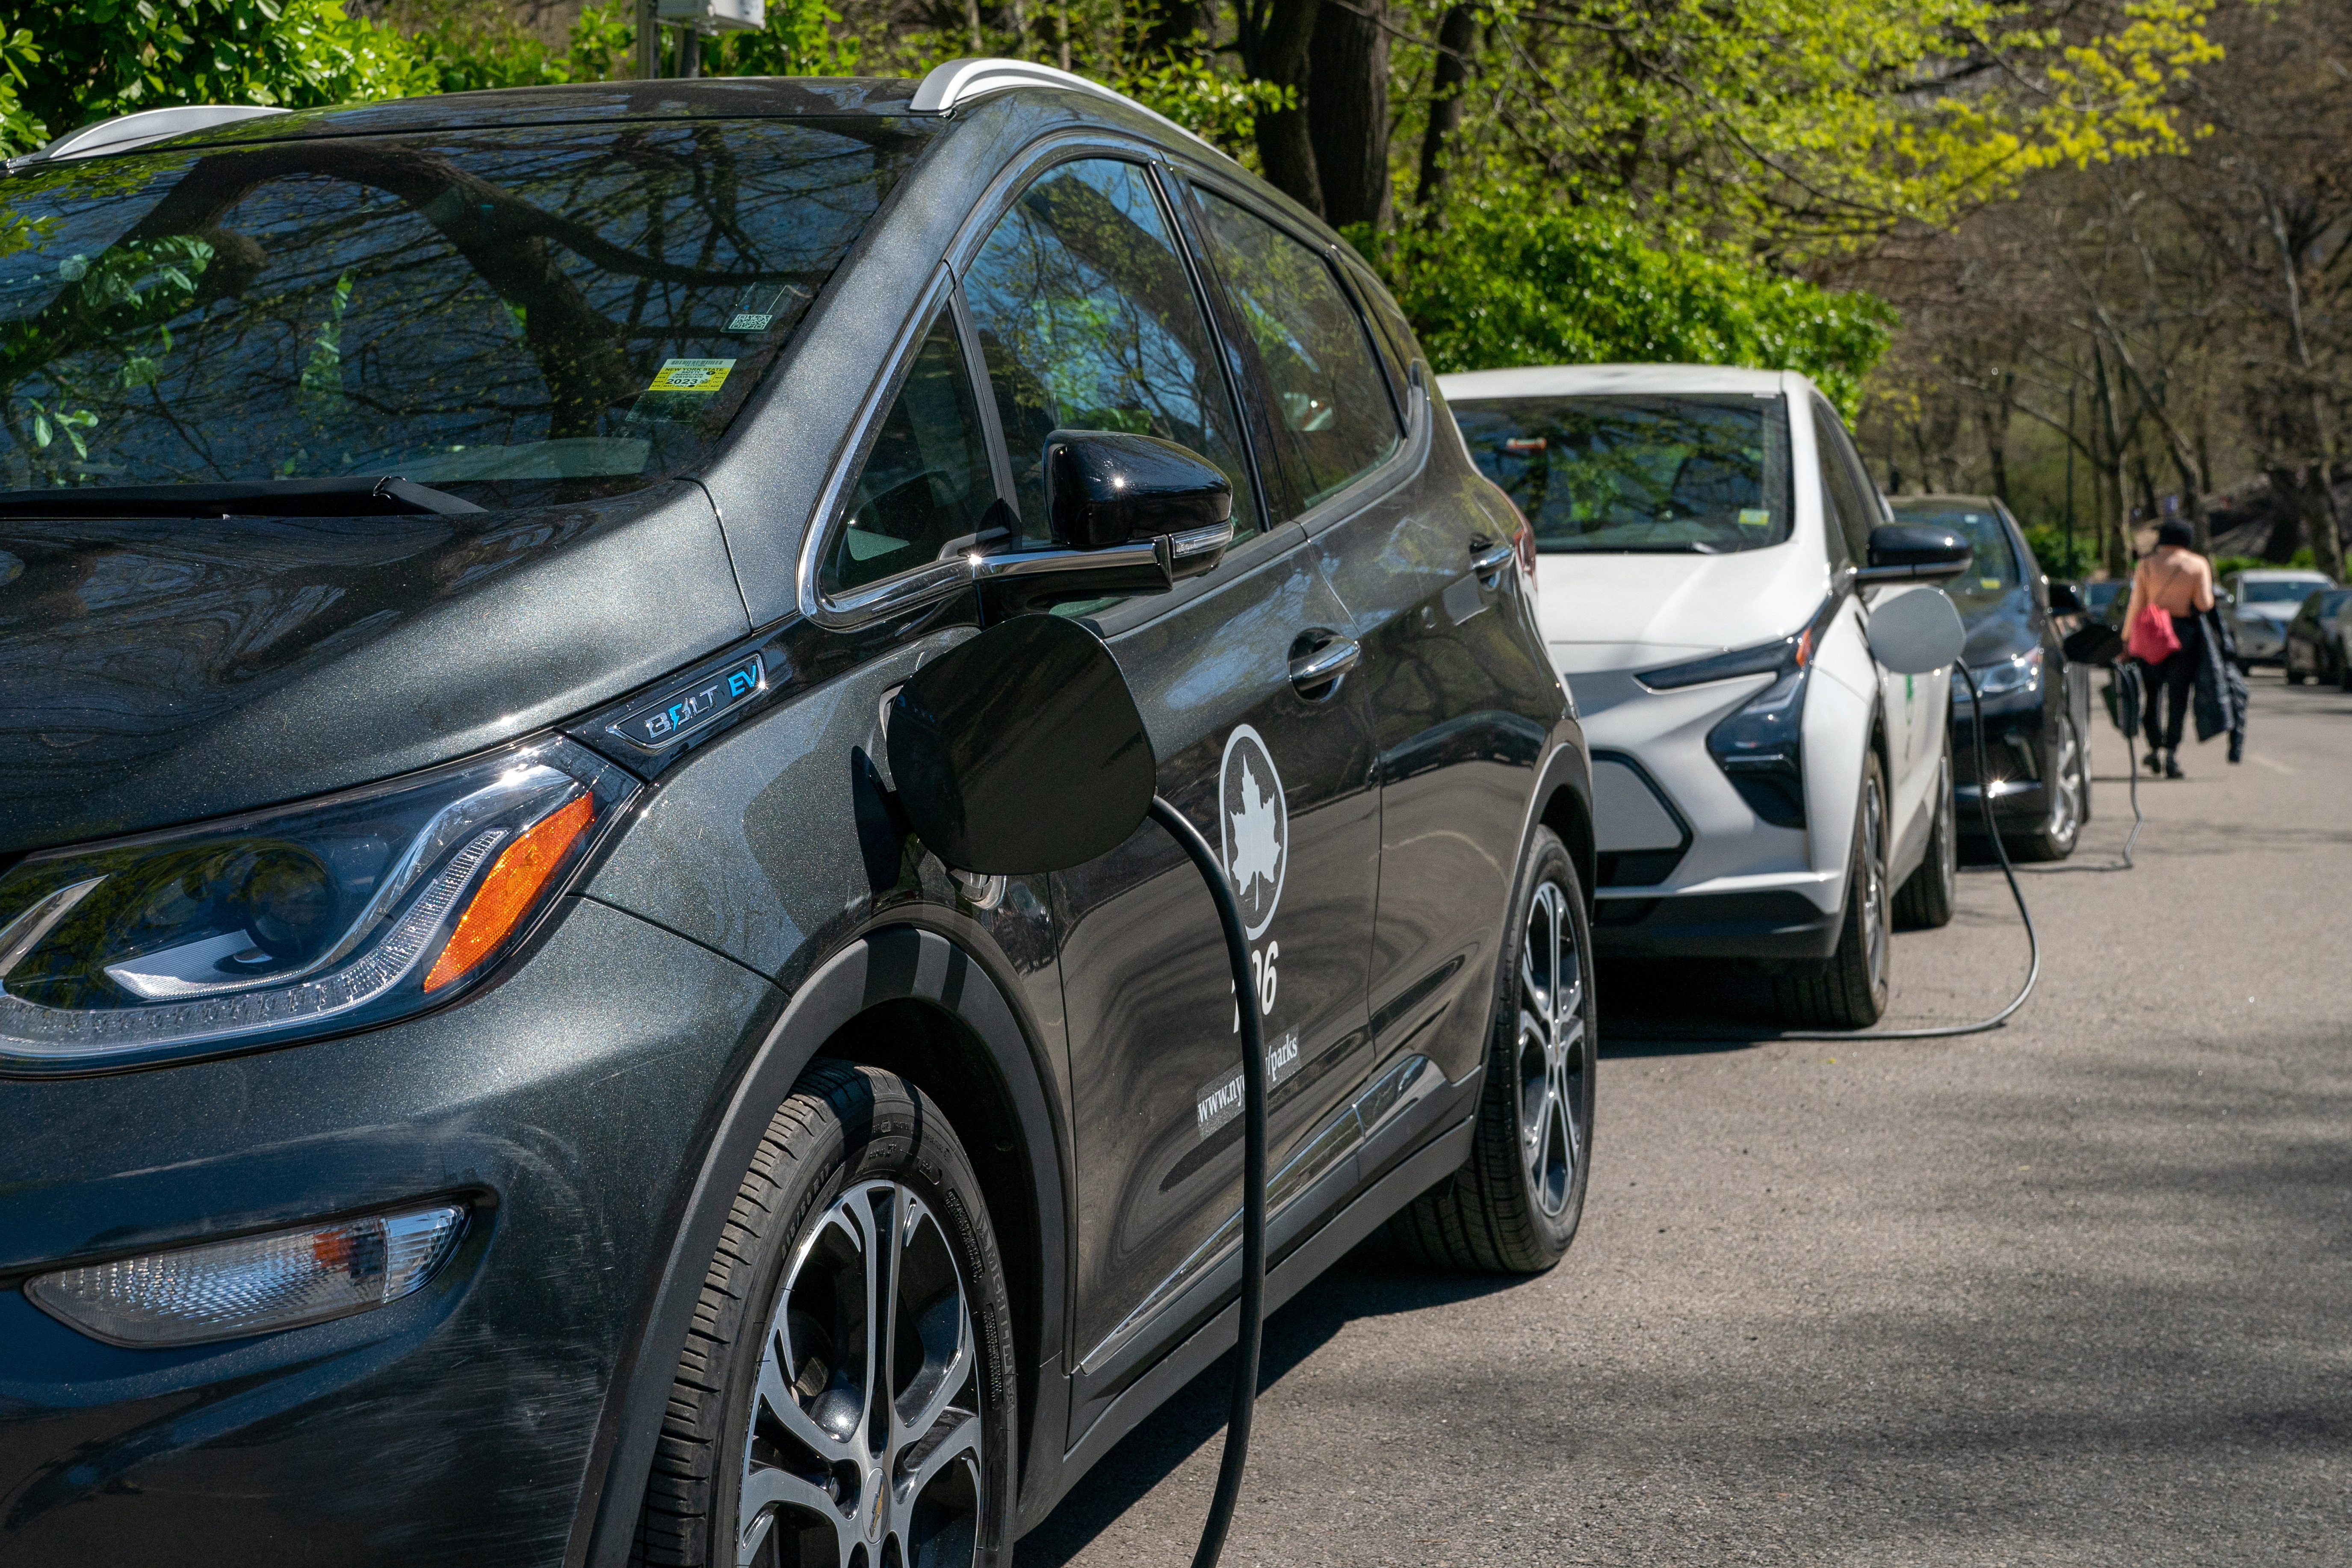 Starting tomorrow, only six EVs will still qualify for a $7,500 federal tax credit